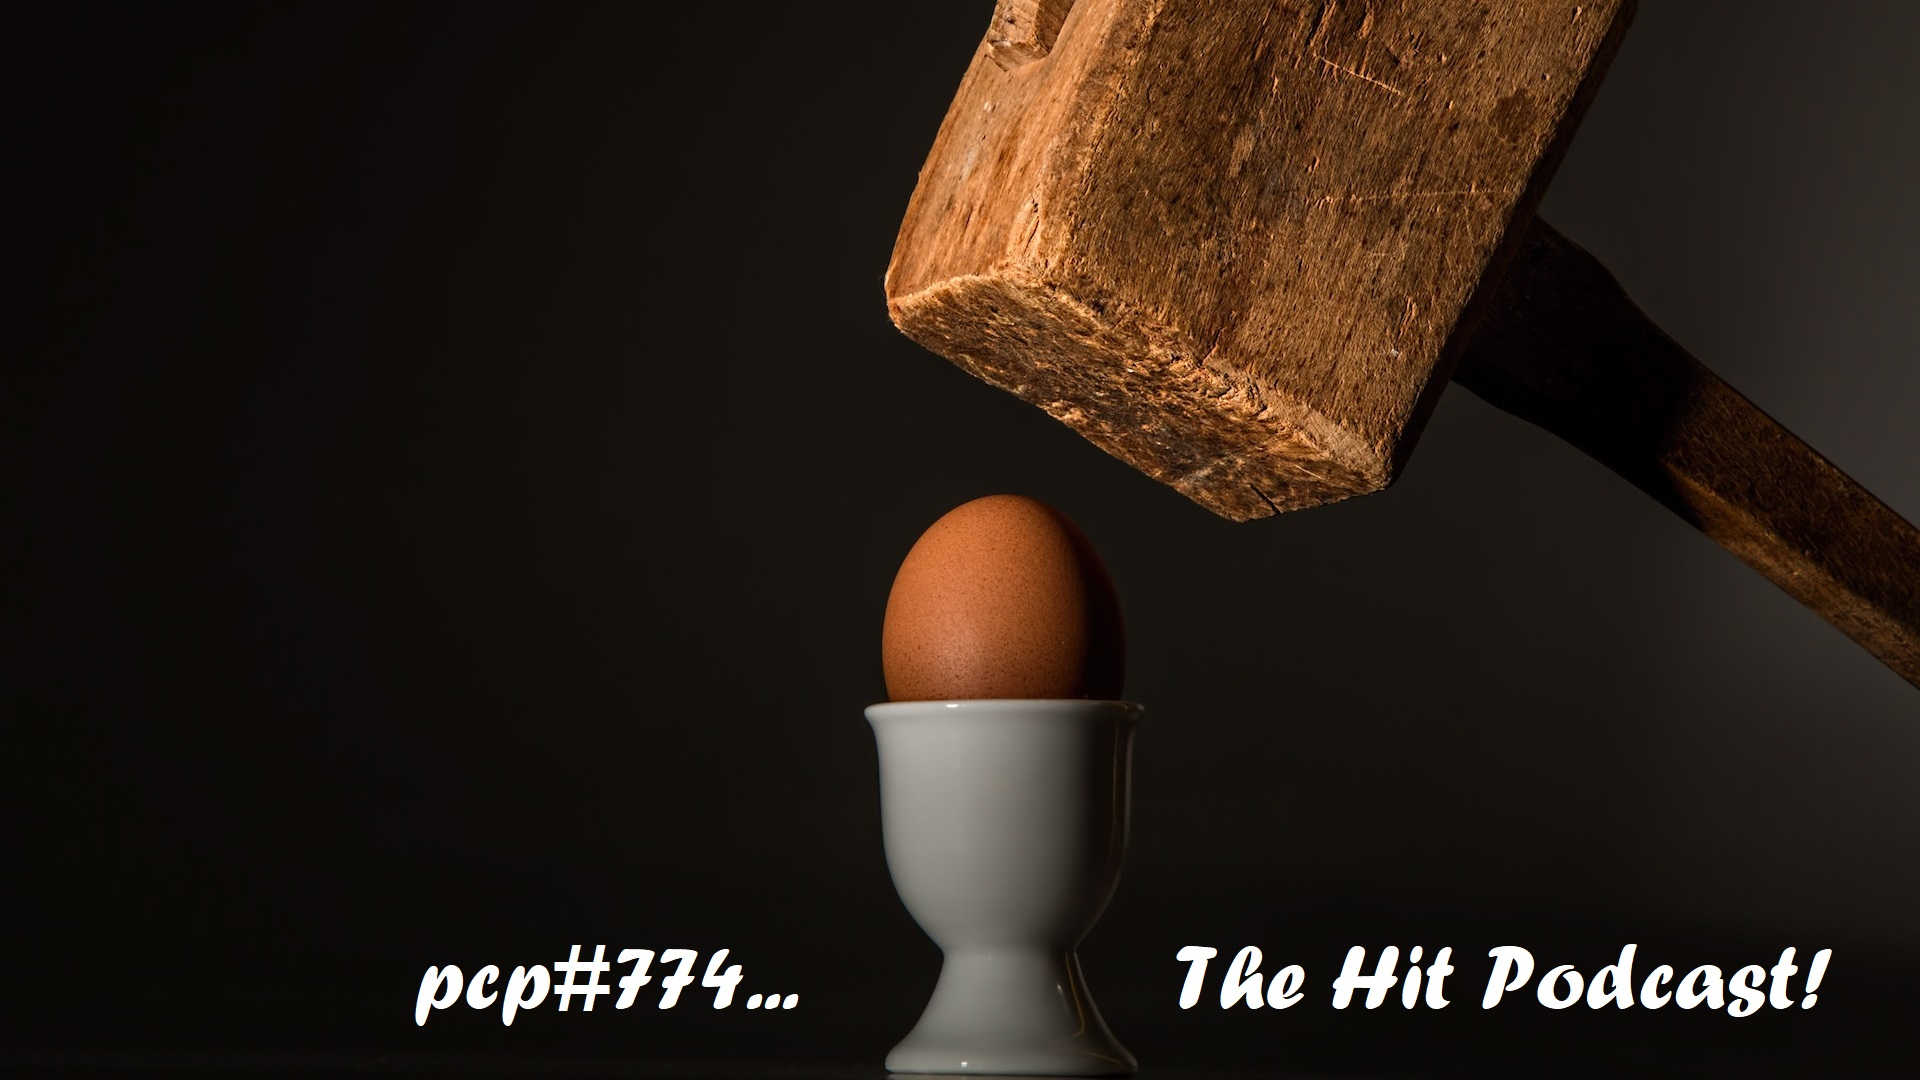 PCP#774... The Hit Podcast!